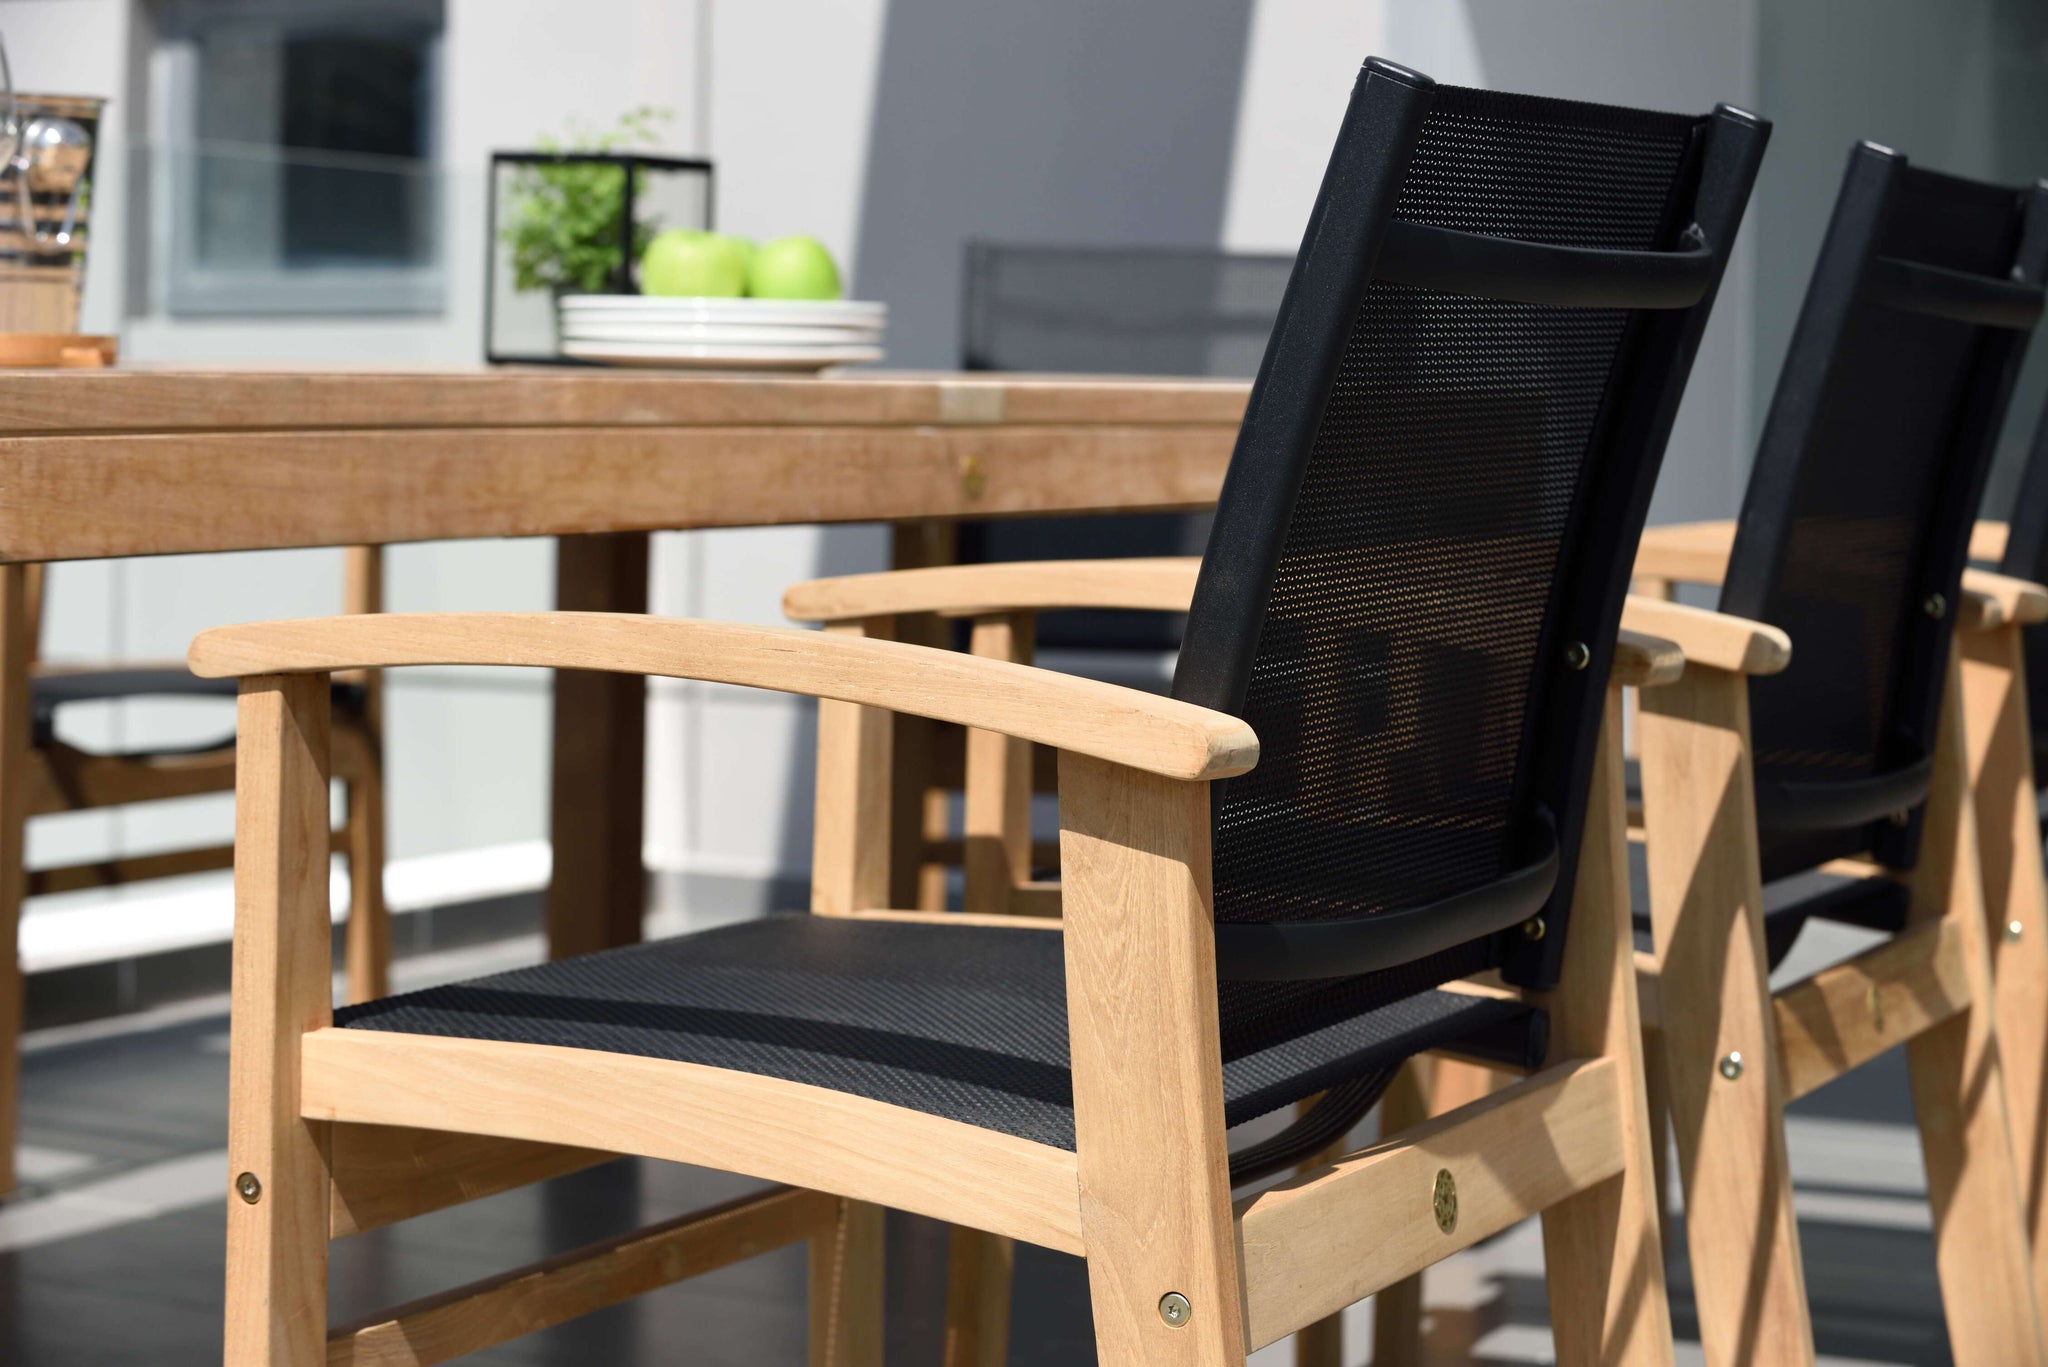 Fortuna Black Outdoor Dining Chair